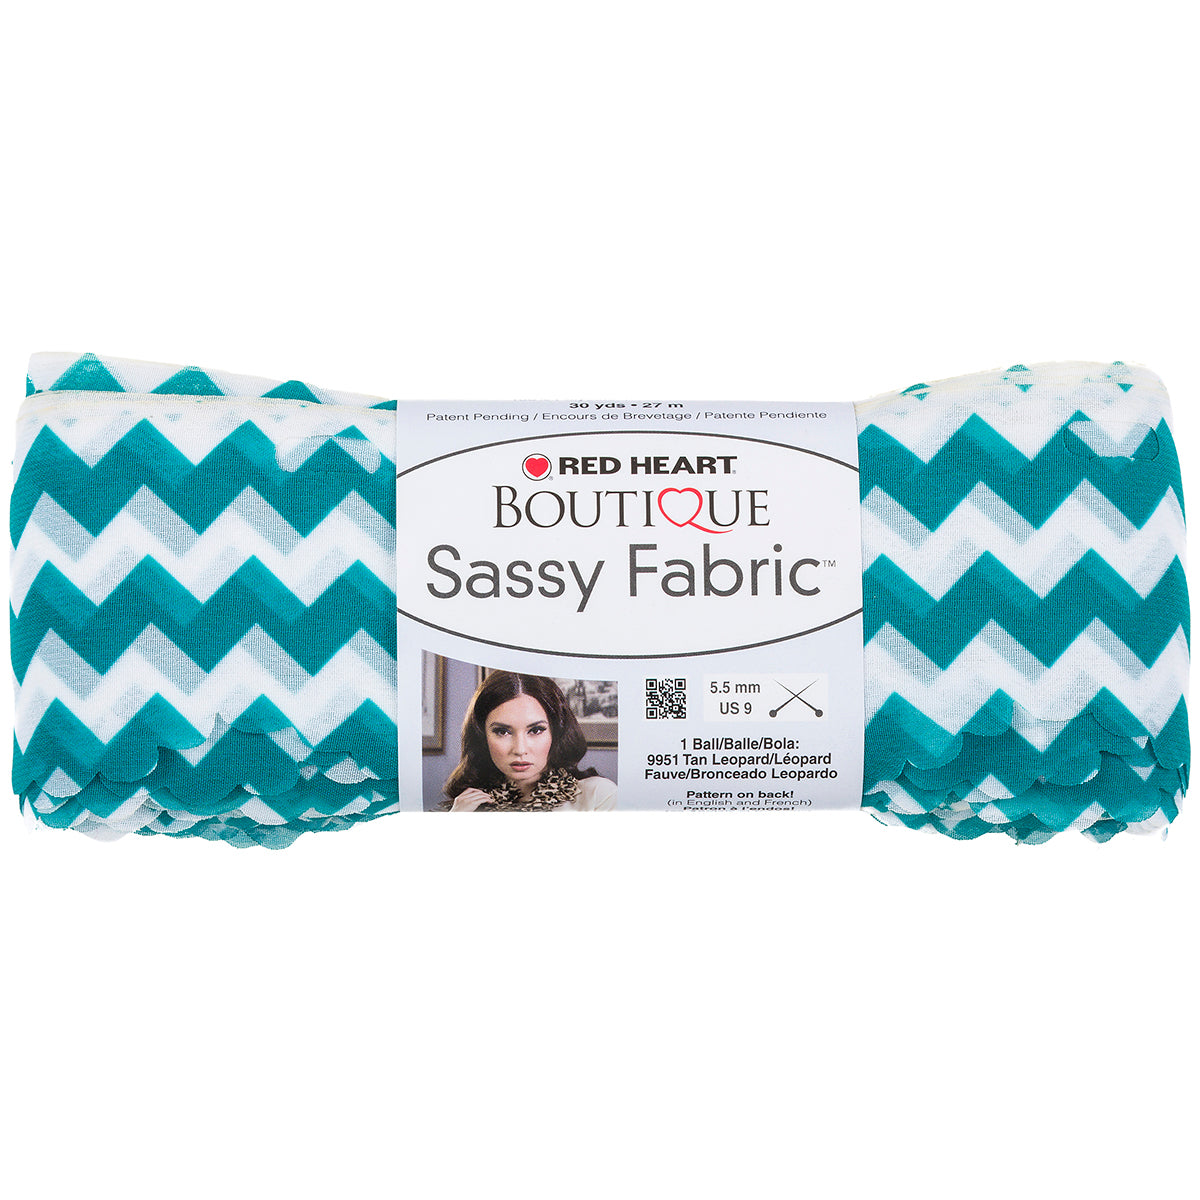 Red Heart Boutique Sassy Fabric Yarn - Clearance shades